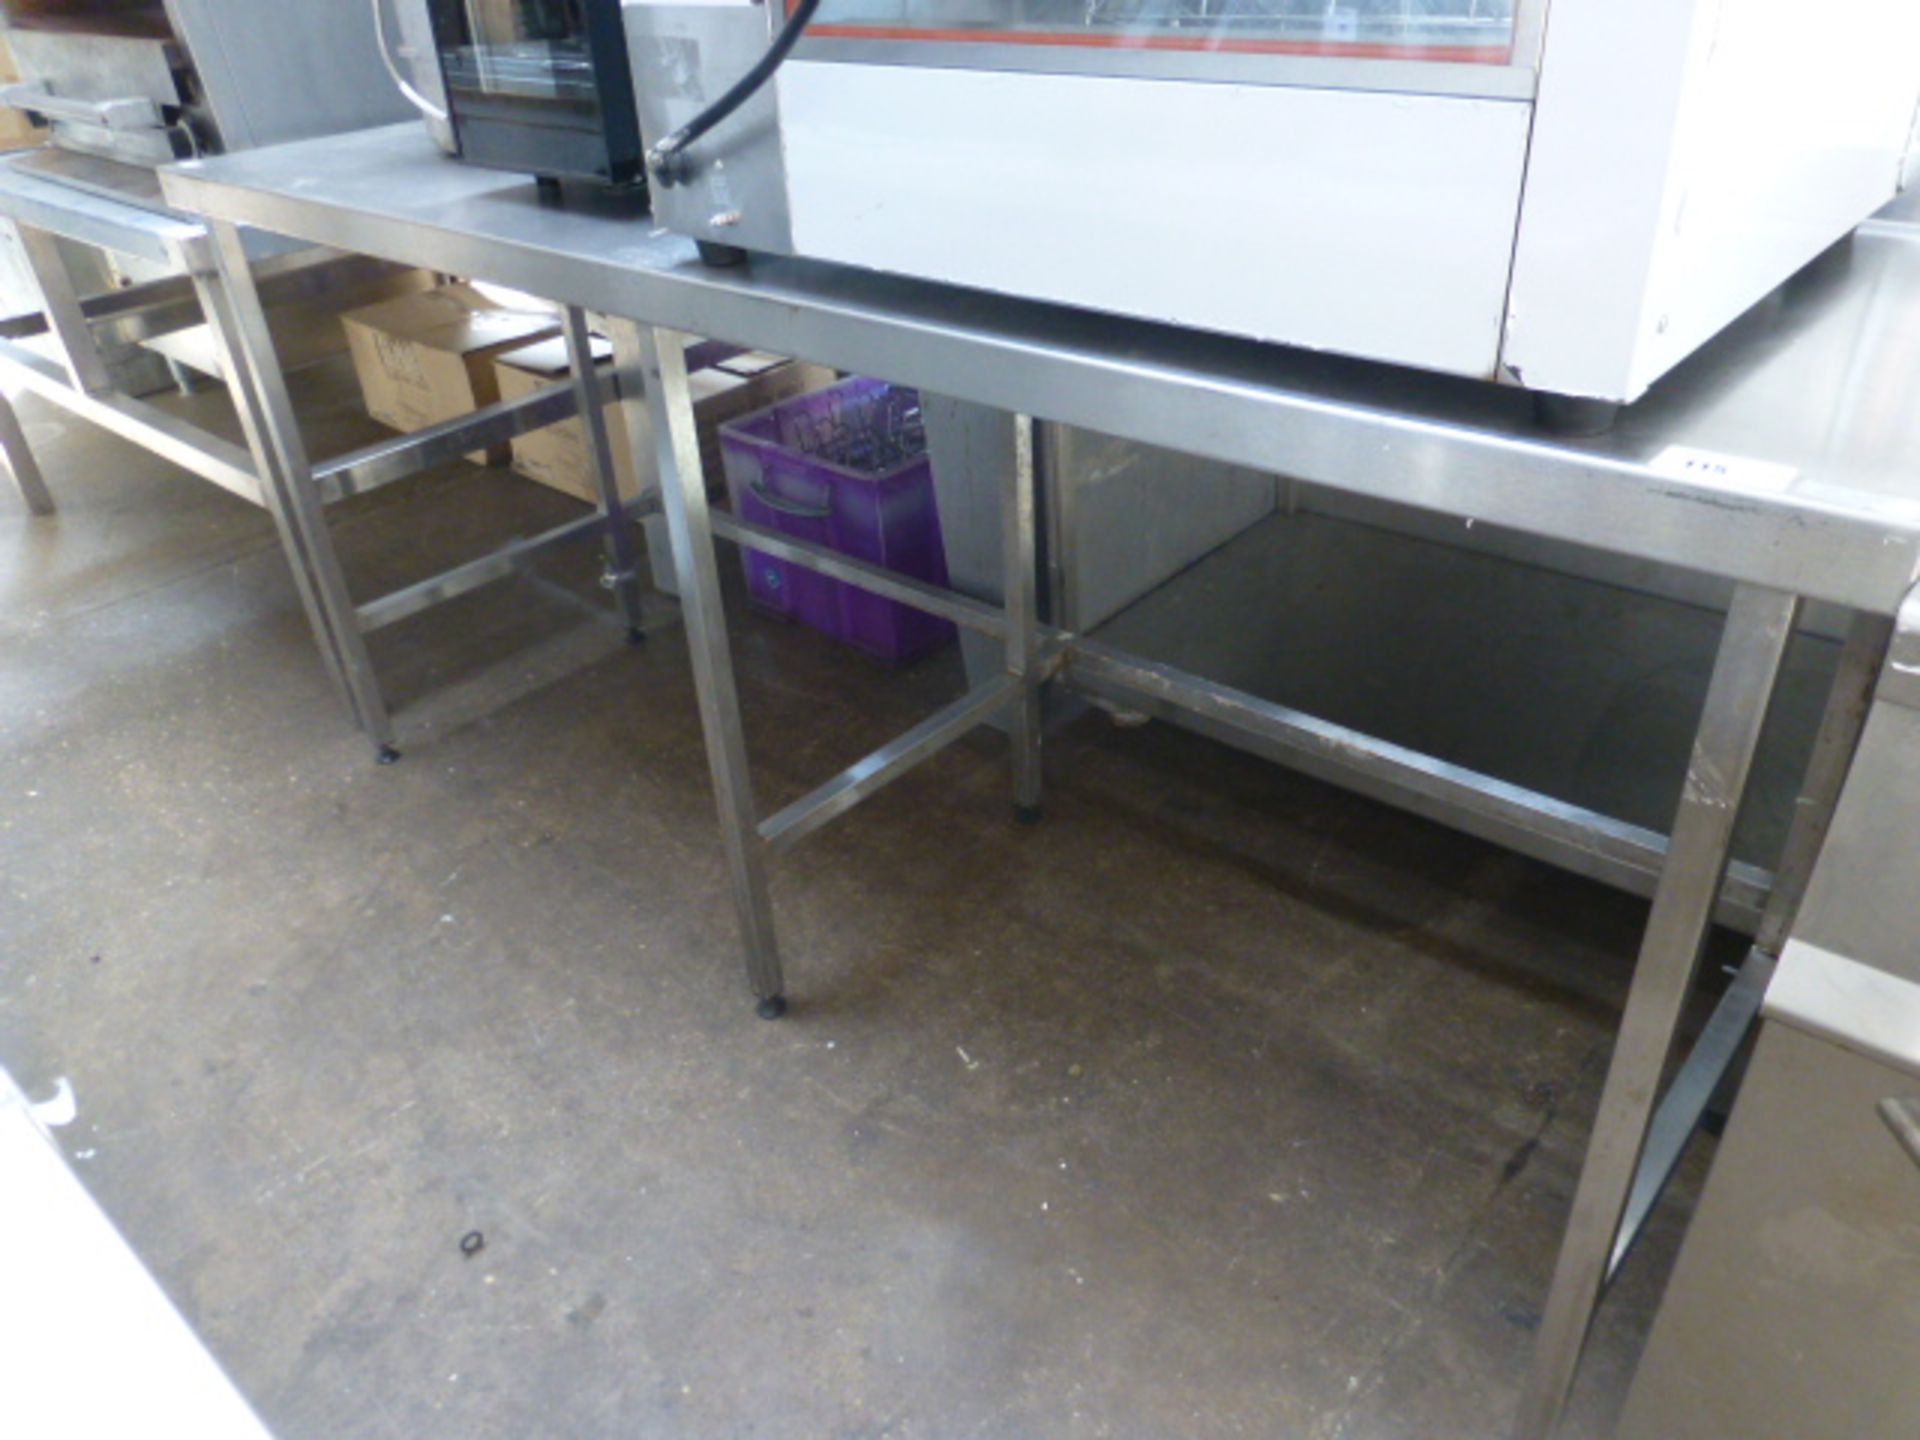 200cm stainless steel preparation table with space under for appliances